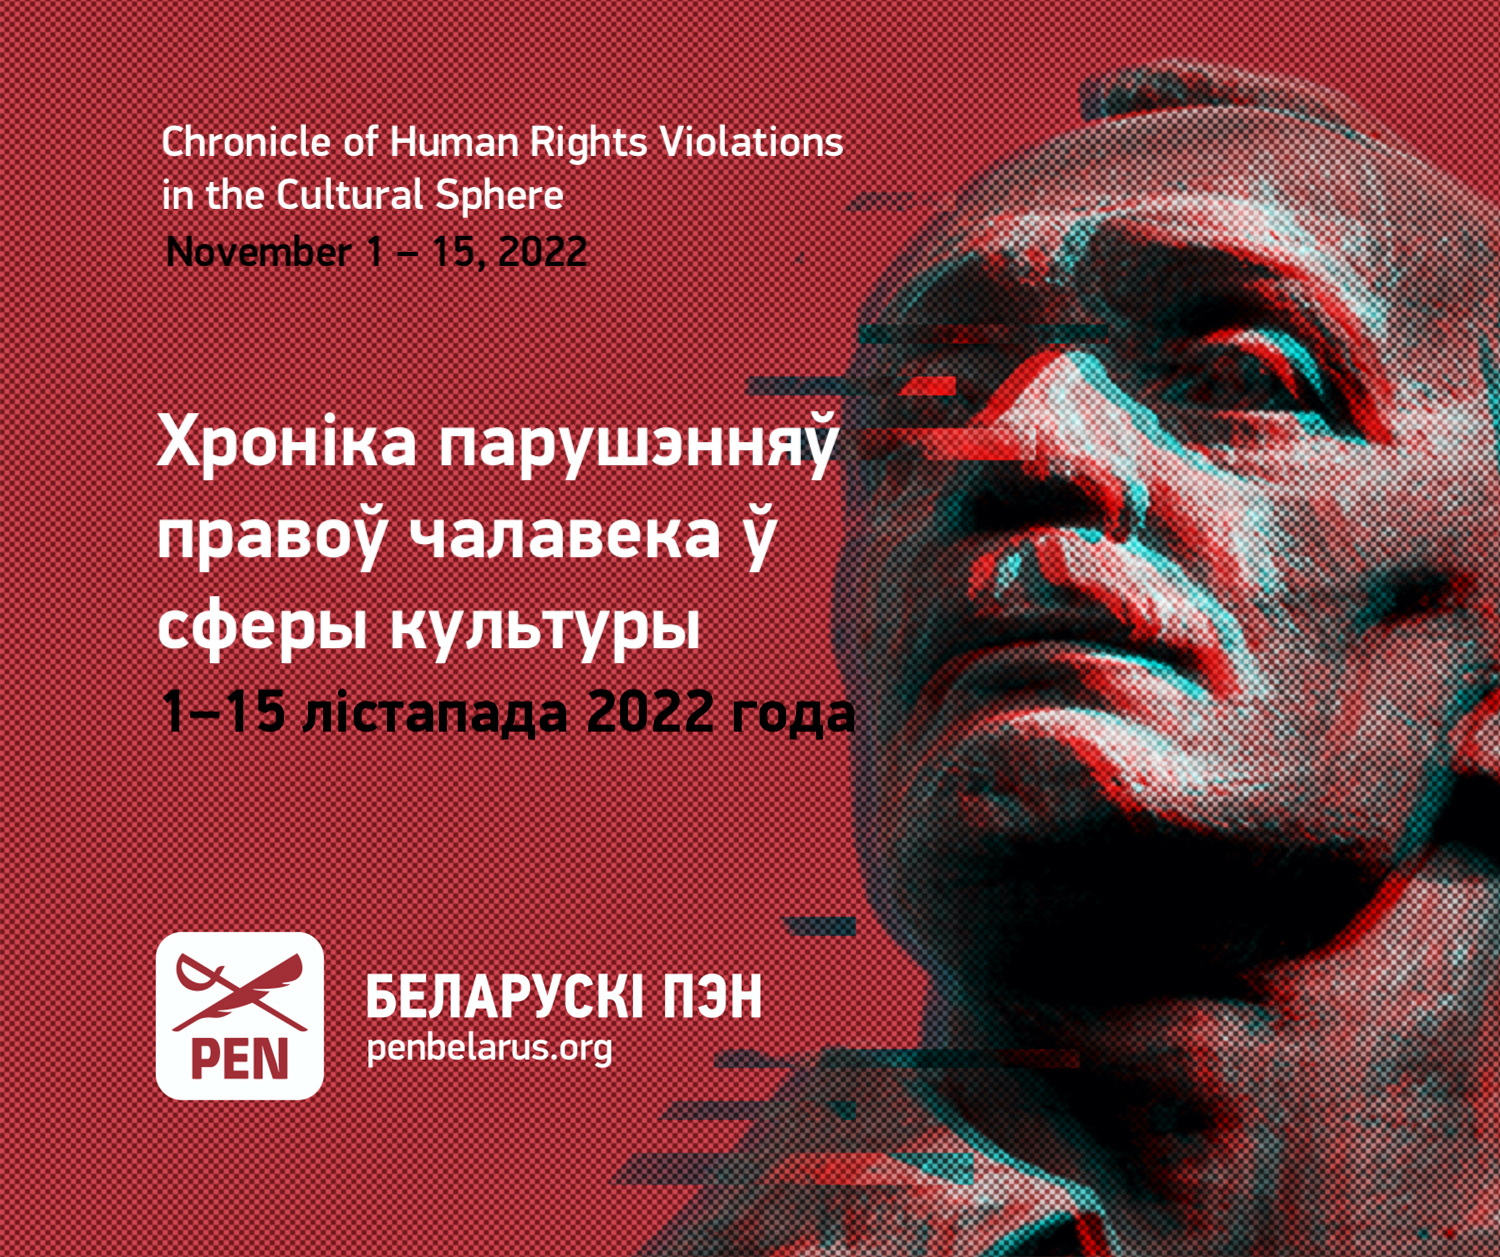 Chronicle of human rights violations in the cultural sphere (November 1-15, 2022)